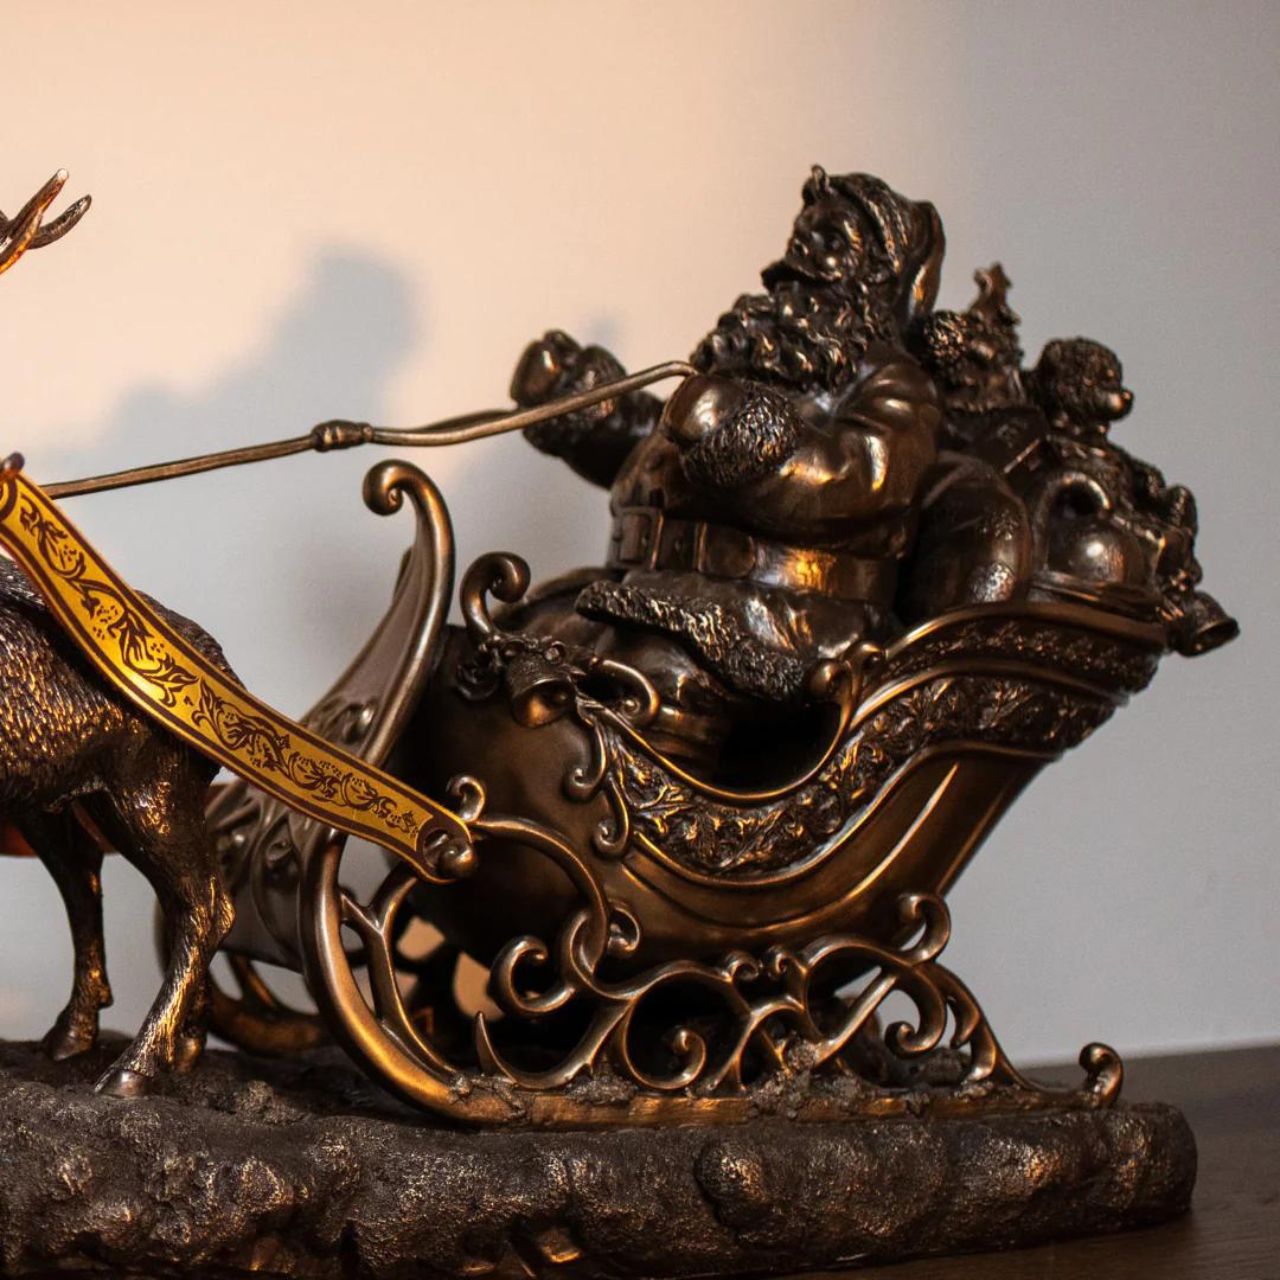 Santa on Sleigh by Genesis  Beautifully crafted from cast bronze and handcrafted, this Santa on Sleigh sculpture will make a beautiful addition to your home during the holidays. Intricately detailed, this Santa Claus features three reindeer's pulling his sleigh.